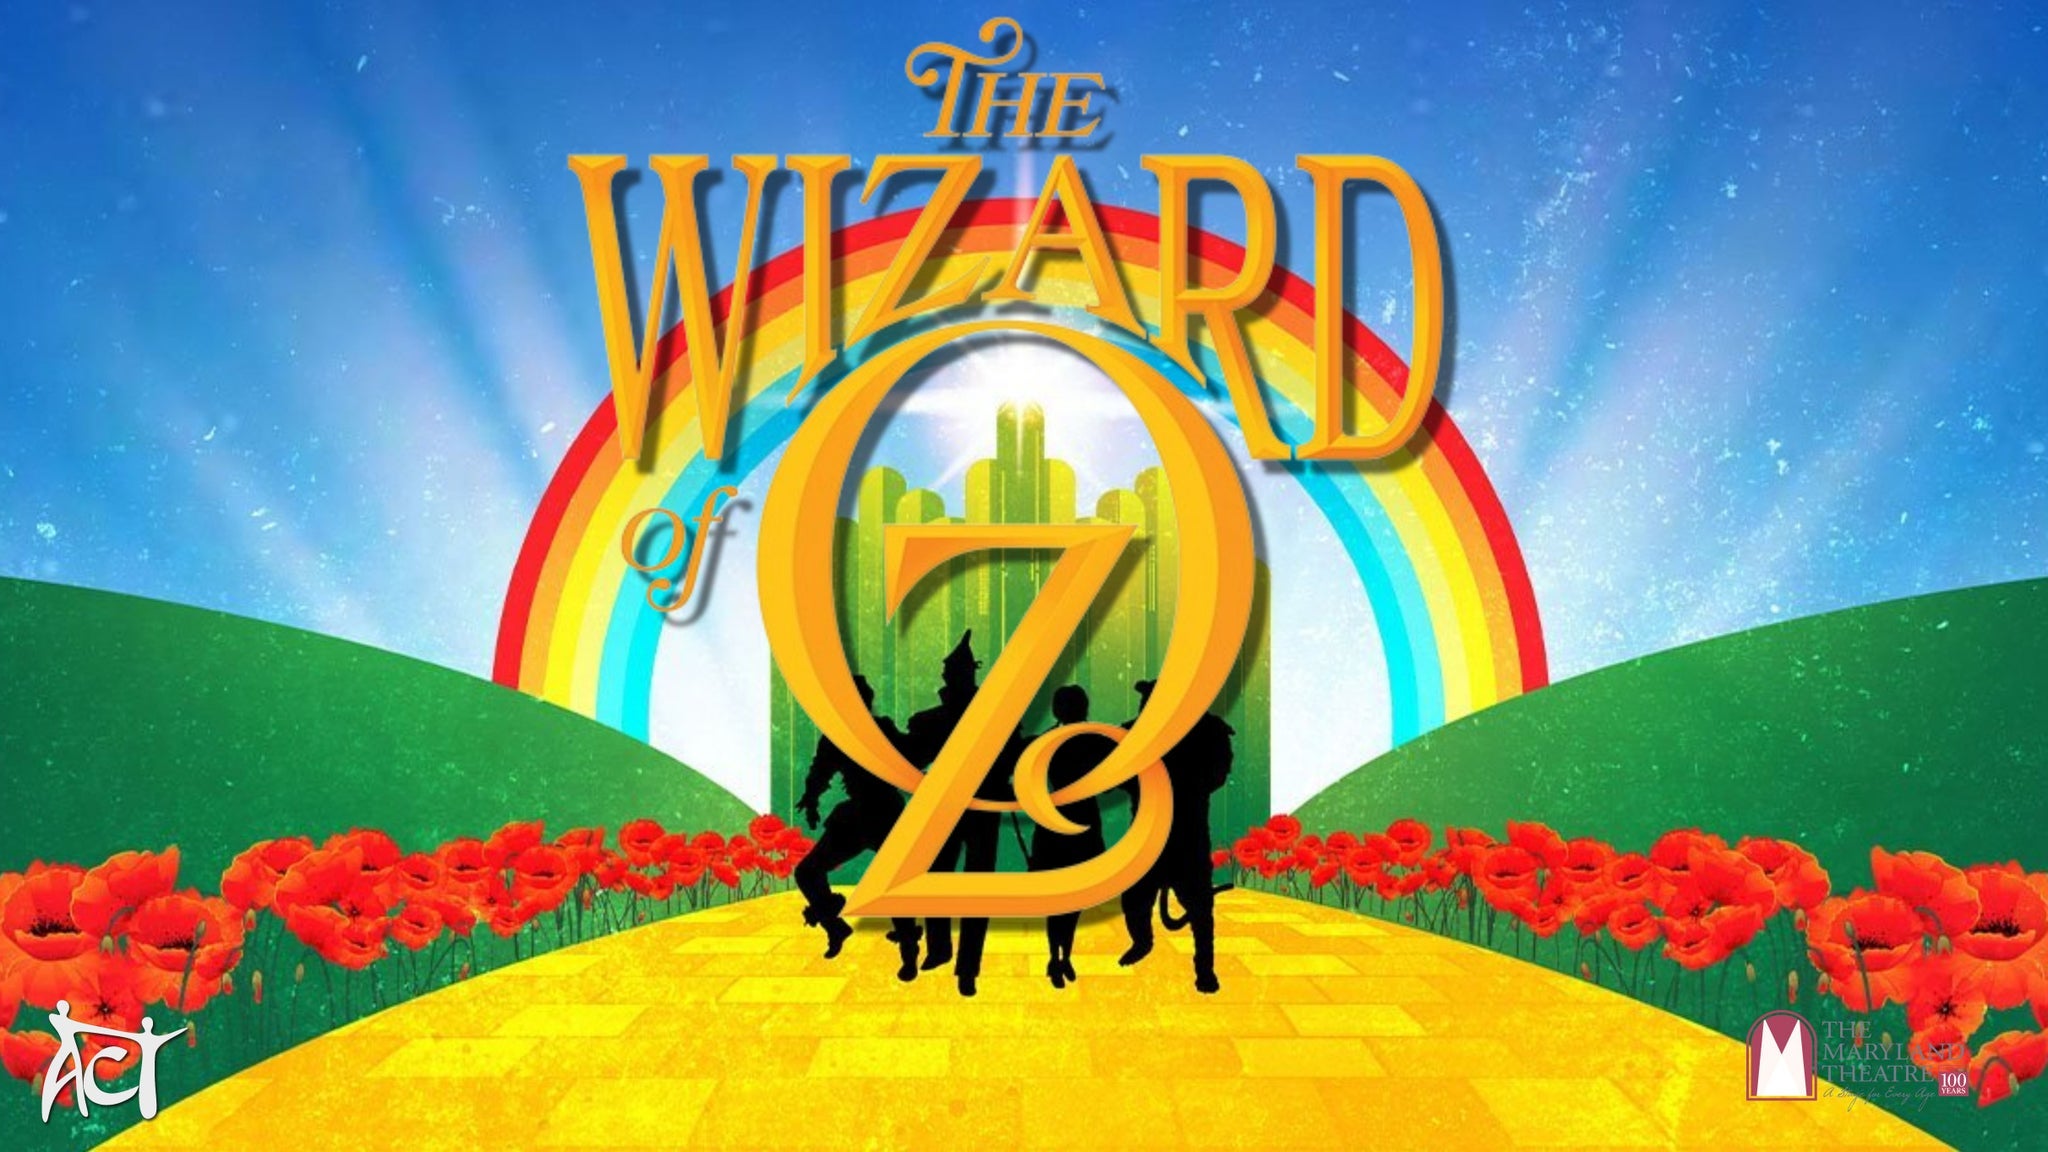 The Wizard of Oz Presented by ACT presale password for show tickets in Hagerstown, MD (The Maryland Theatre)